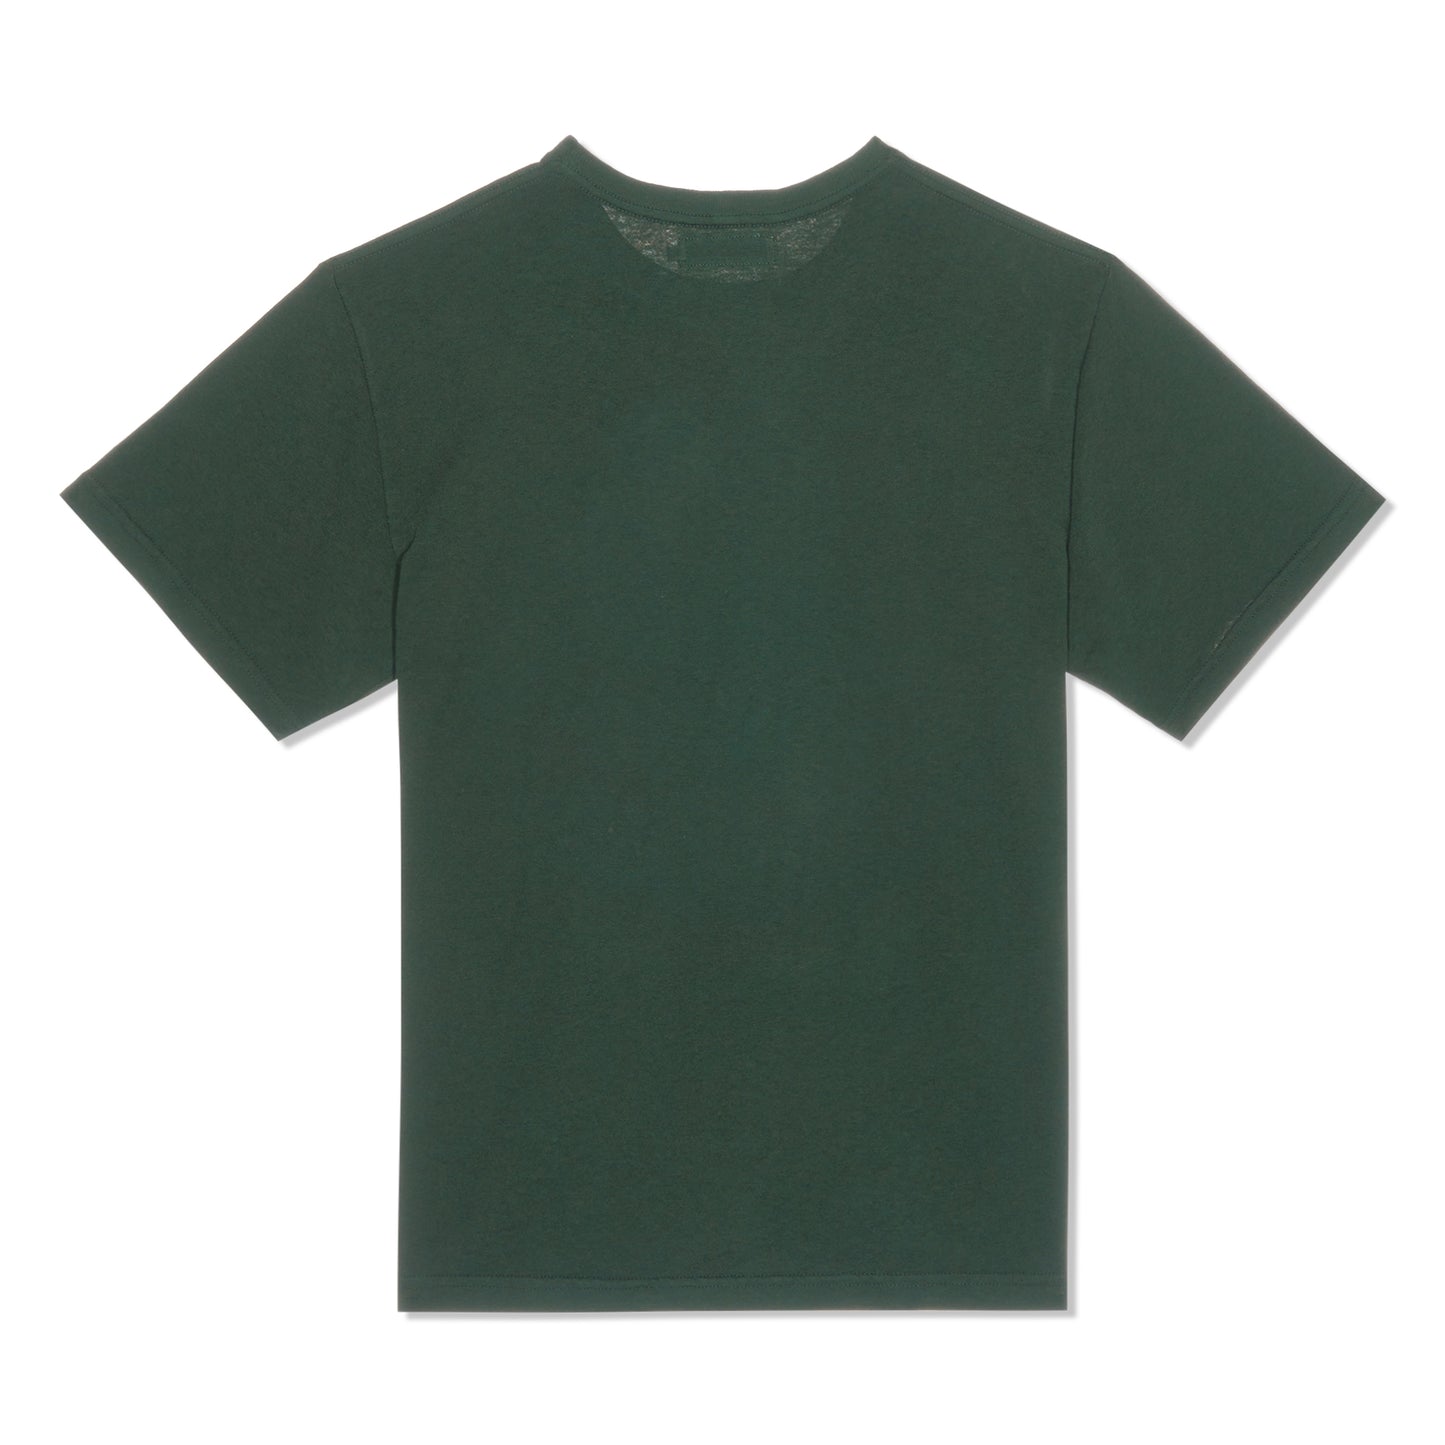 Afield Out Range T-Shirt (Forest Green)